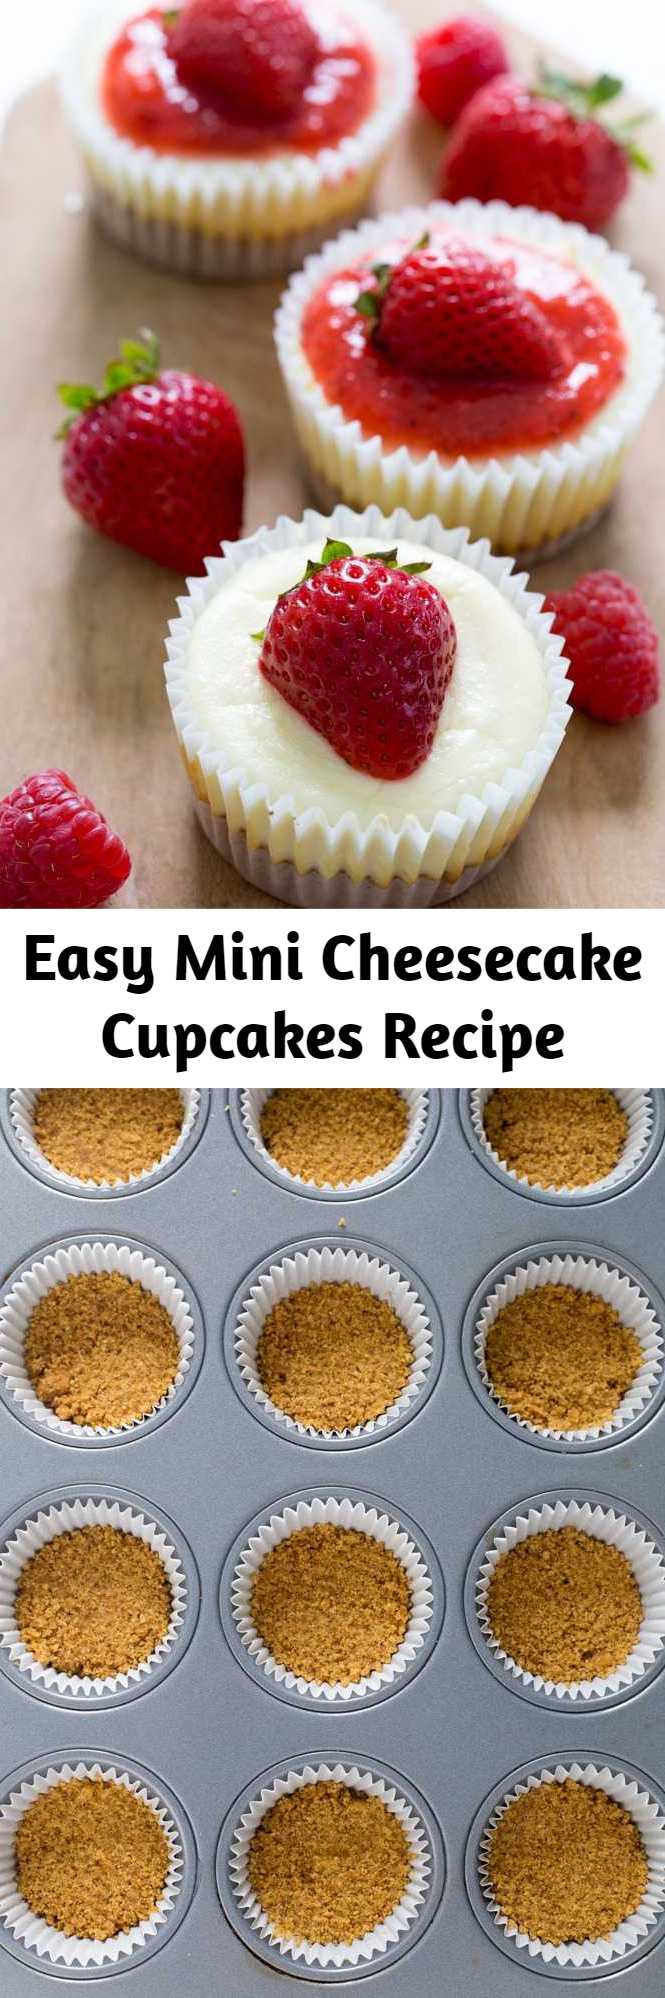 Easy Mini Cheesecake Cupcakes Recipe - Super Easy Mini Cheesecake Cupcakes. Layered with a graham cracker crust and creamy tangy cheesecake. Top with salted caramel sauce, chocolate or strawberry sauce!